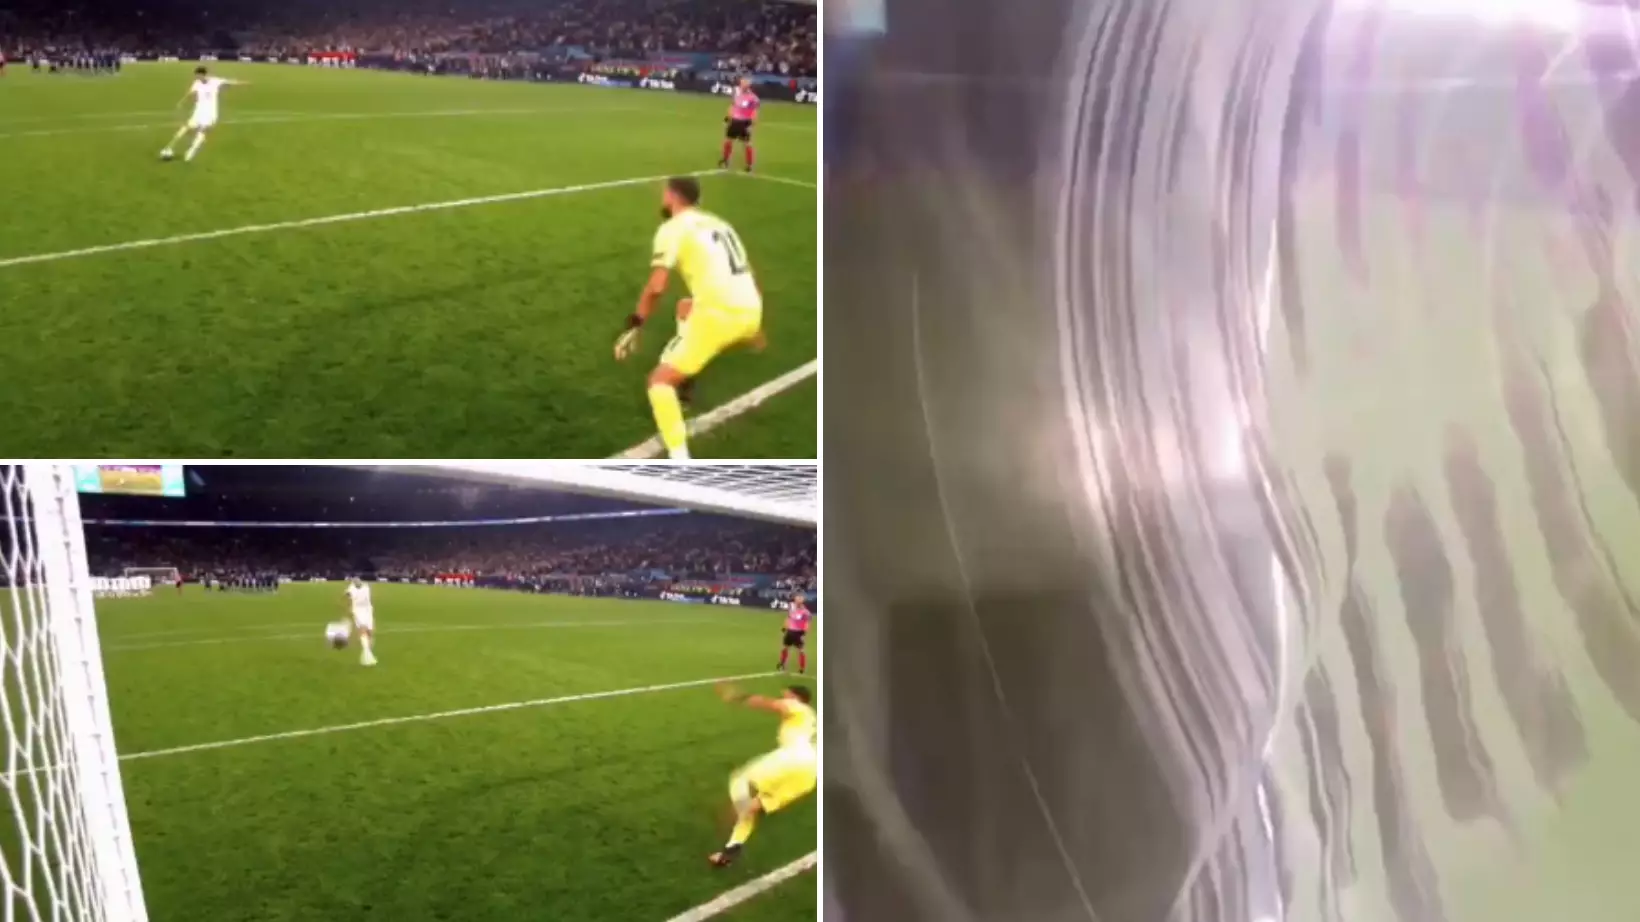 Can We Appreciate Harry Maguire's Rocket Of A Penalty That Destroyed A TV Camera  